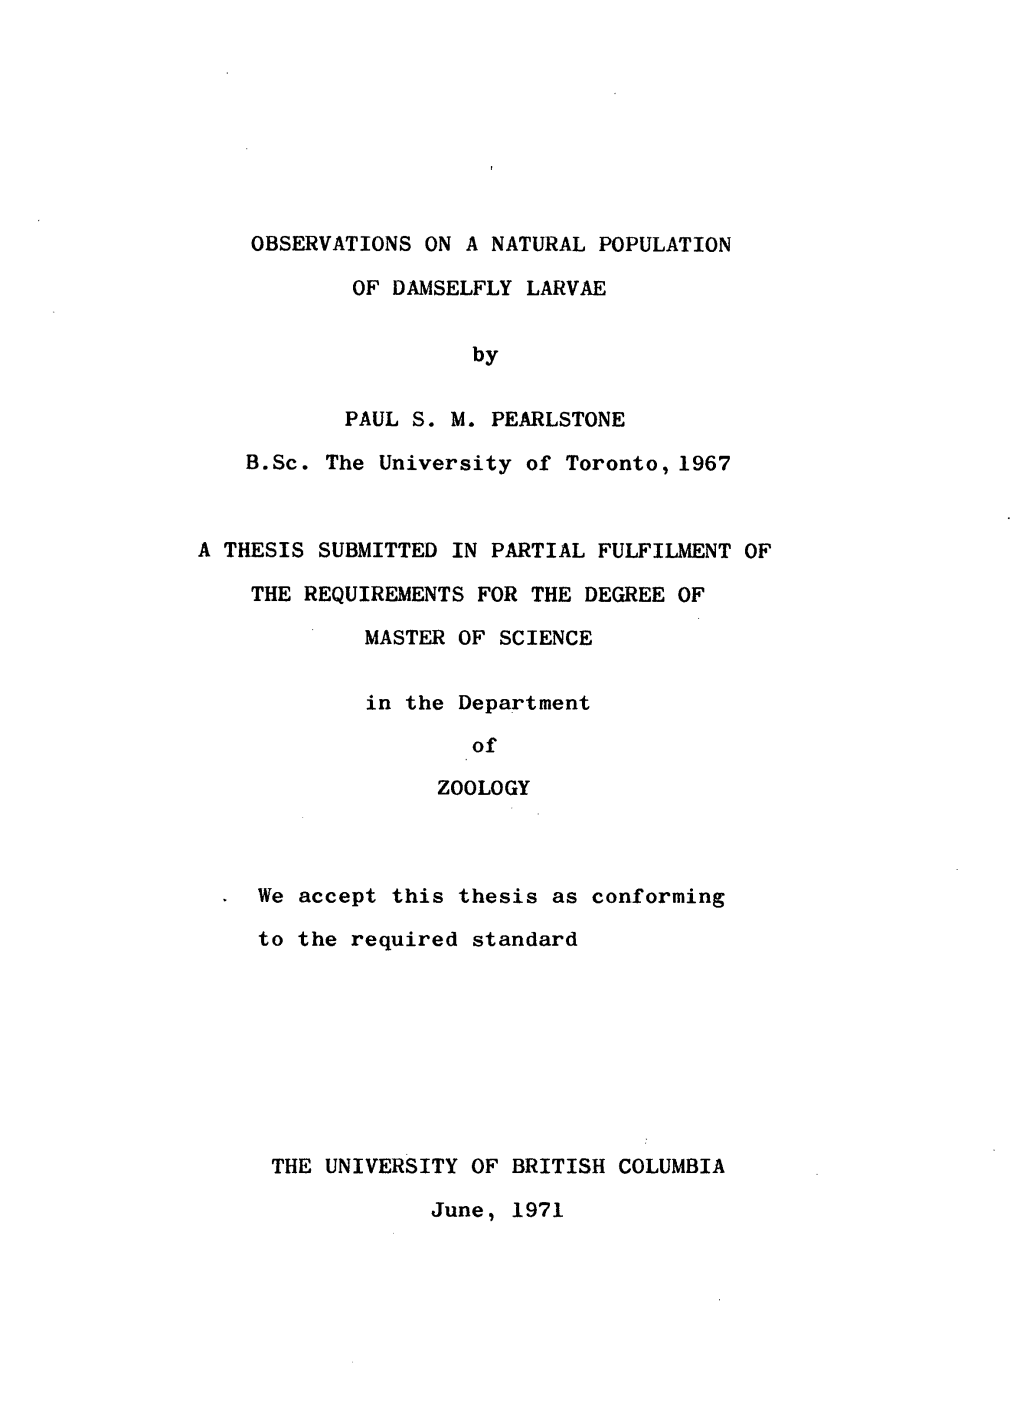 OBSERVATIONS on a NATURAL POPULATION of DAMSELFLY LARVAE by PAUL S. M. PEARLSTONE B.Sc. the University of Toronto, 1967 a THESIS